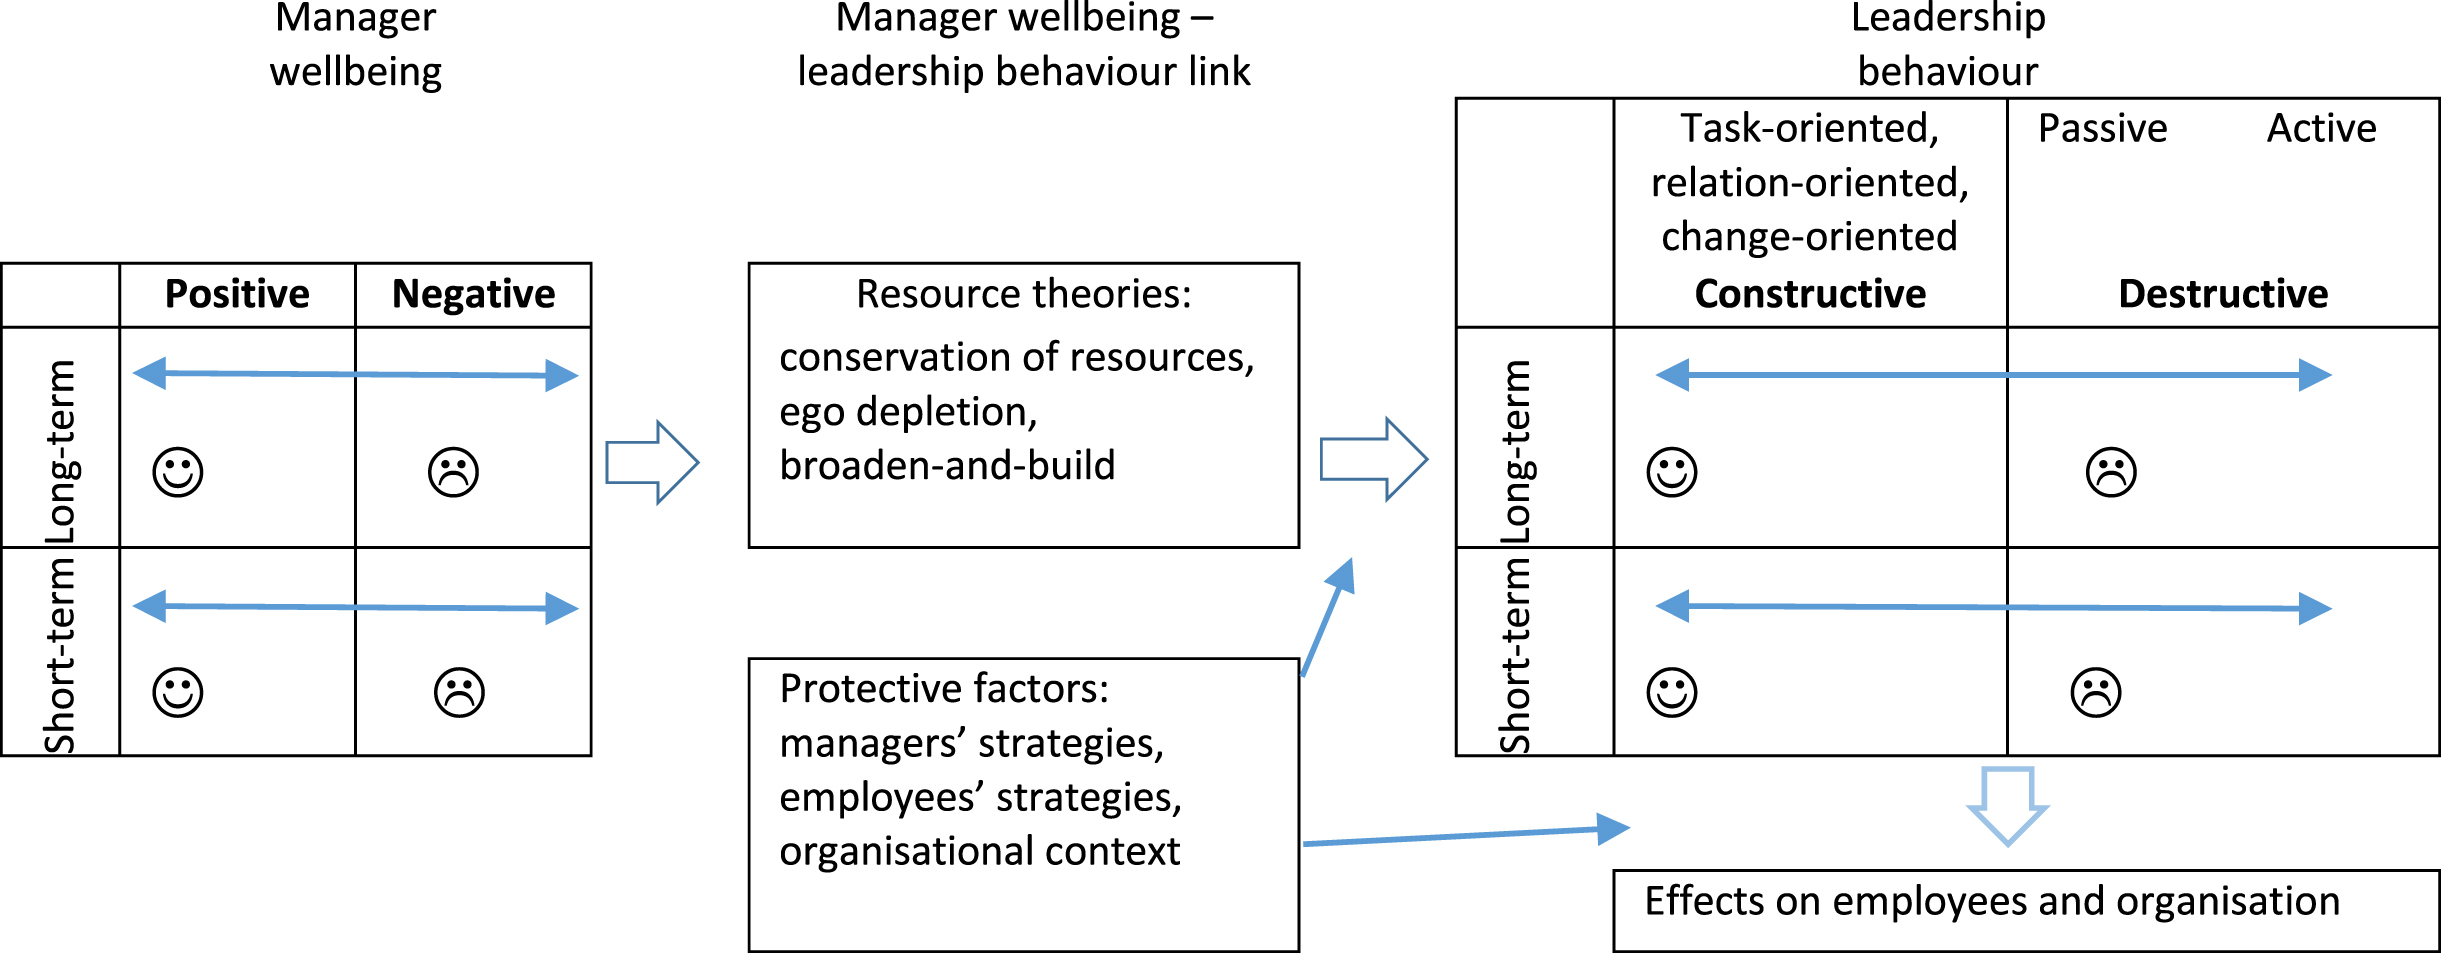 Model of the link from manager wellbeing to leadership behaviour, adjusted from Kaluza et al. [2].